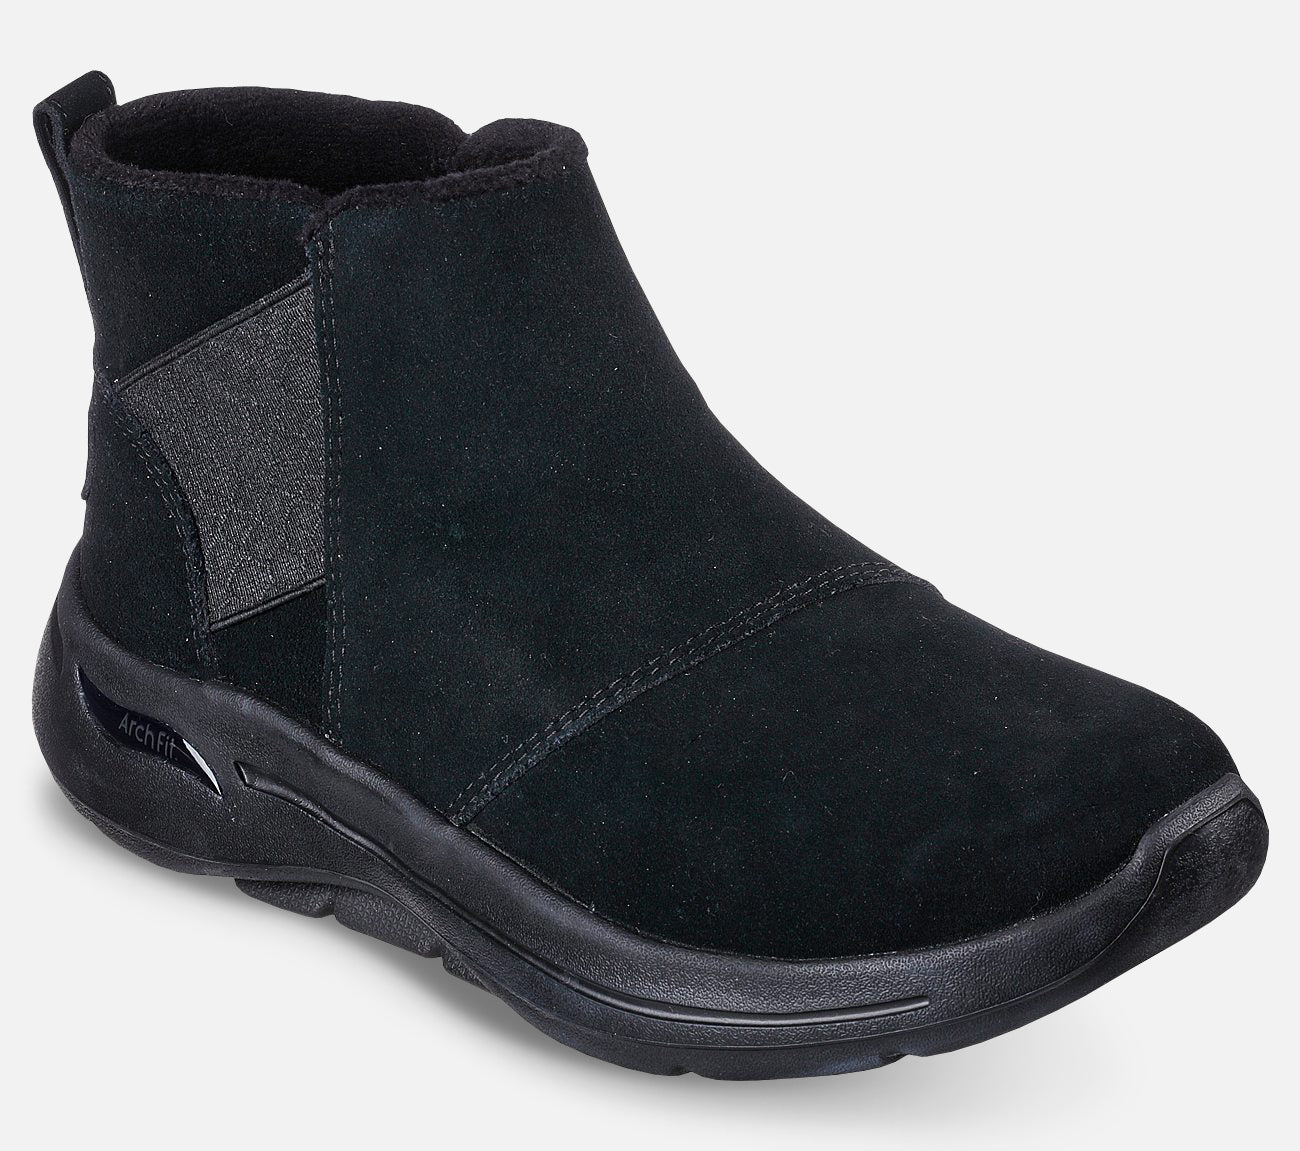 GO WALK Arch Fit Boot - Happy Embrace